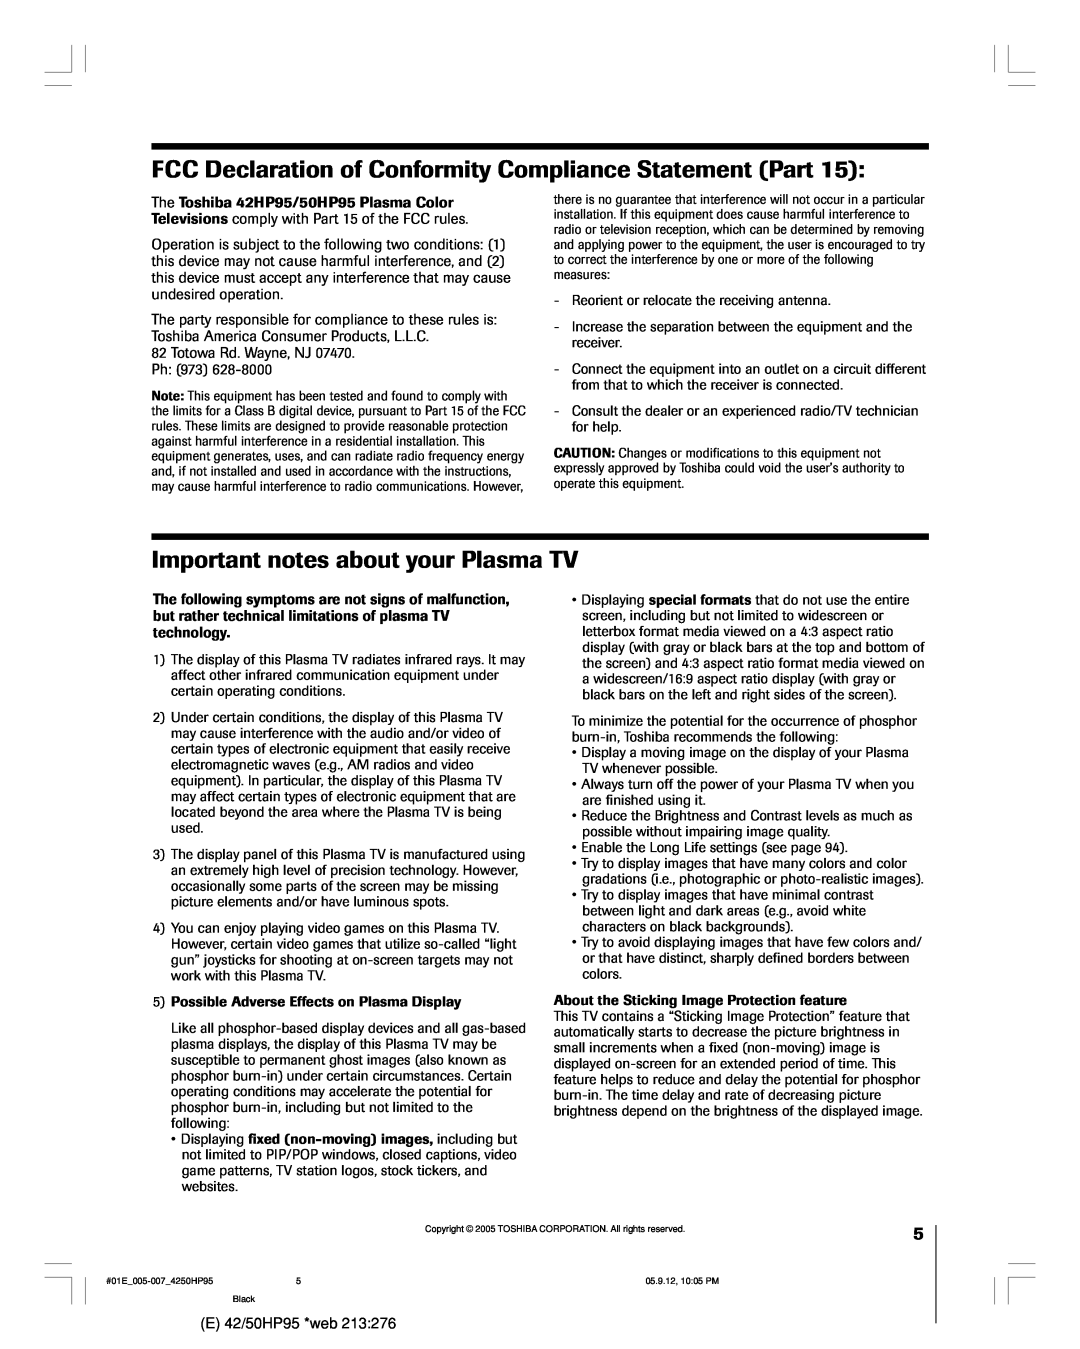 Toshiba 42HP95 owner manual FCC Declaration of Conformity Compliance Statement Part, Important notes about your Plasma TV 